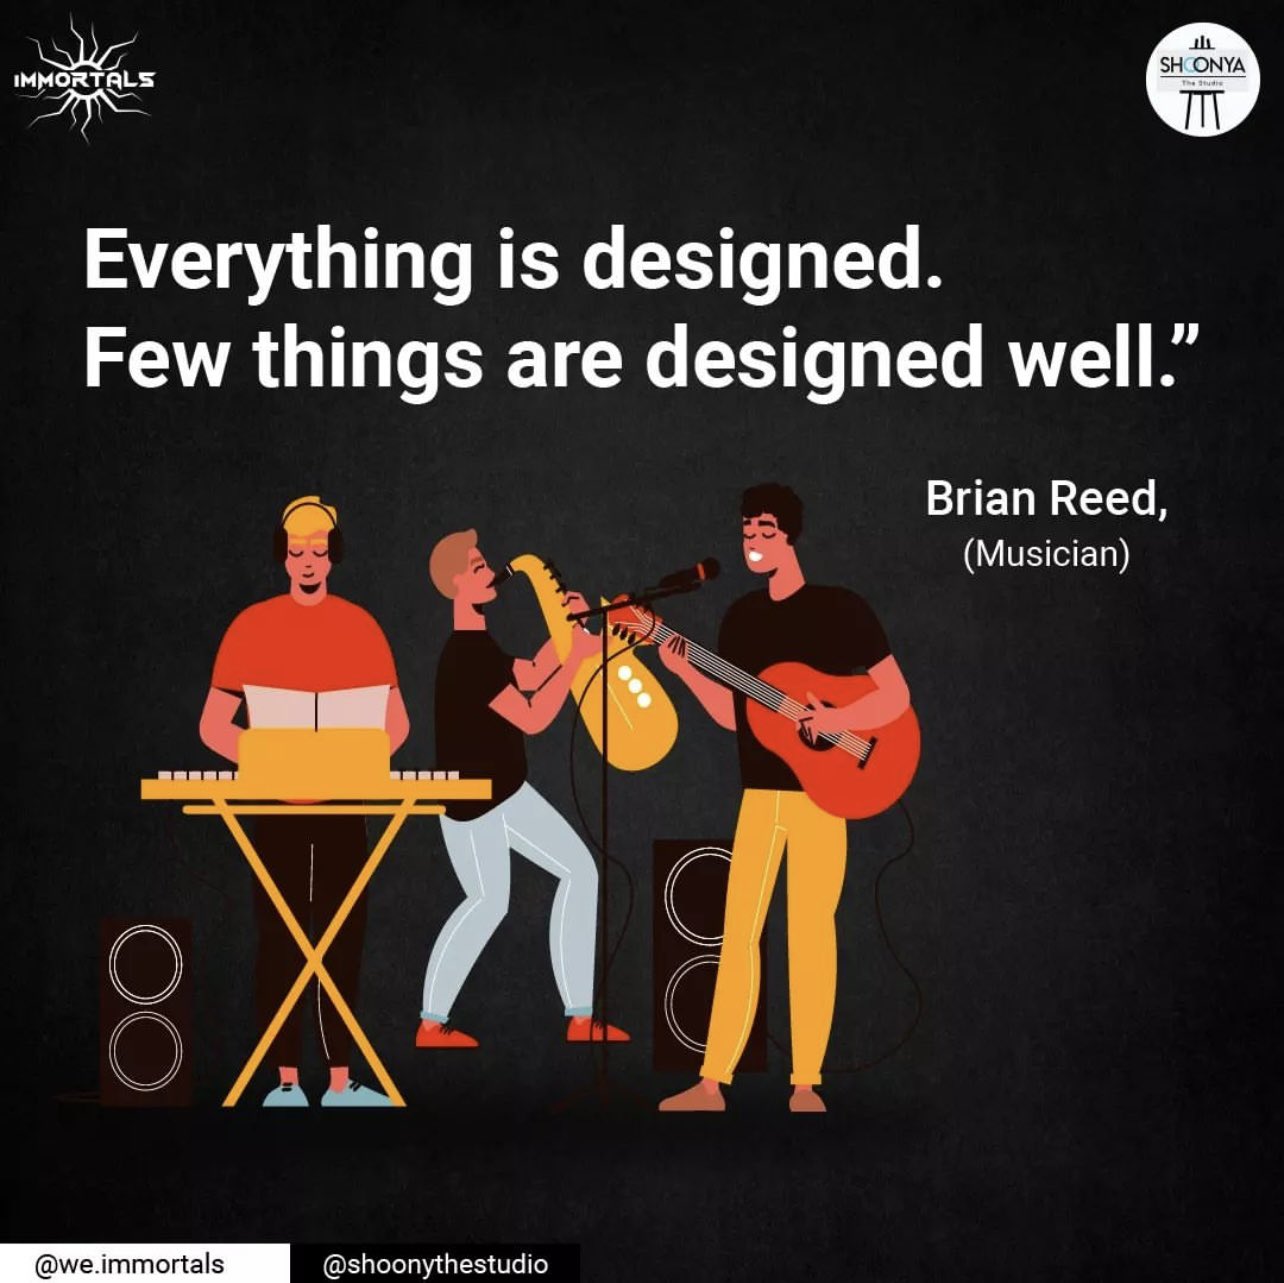 Everything is designed, few things are designed well